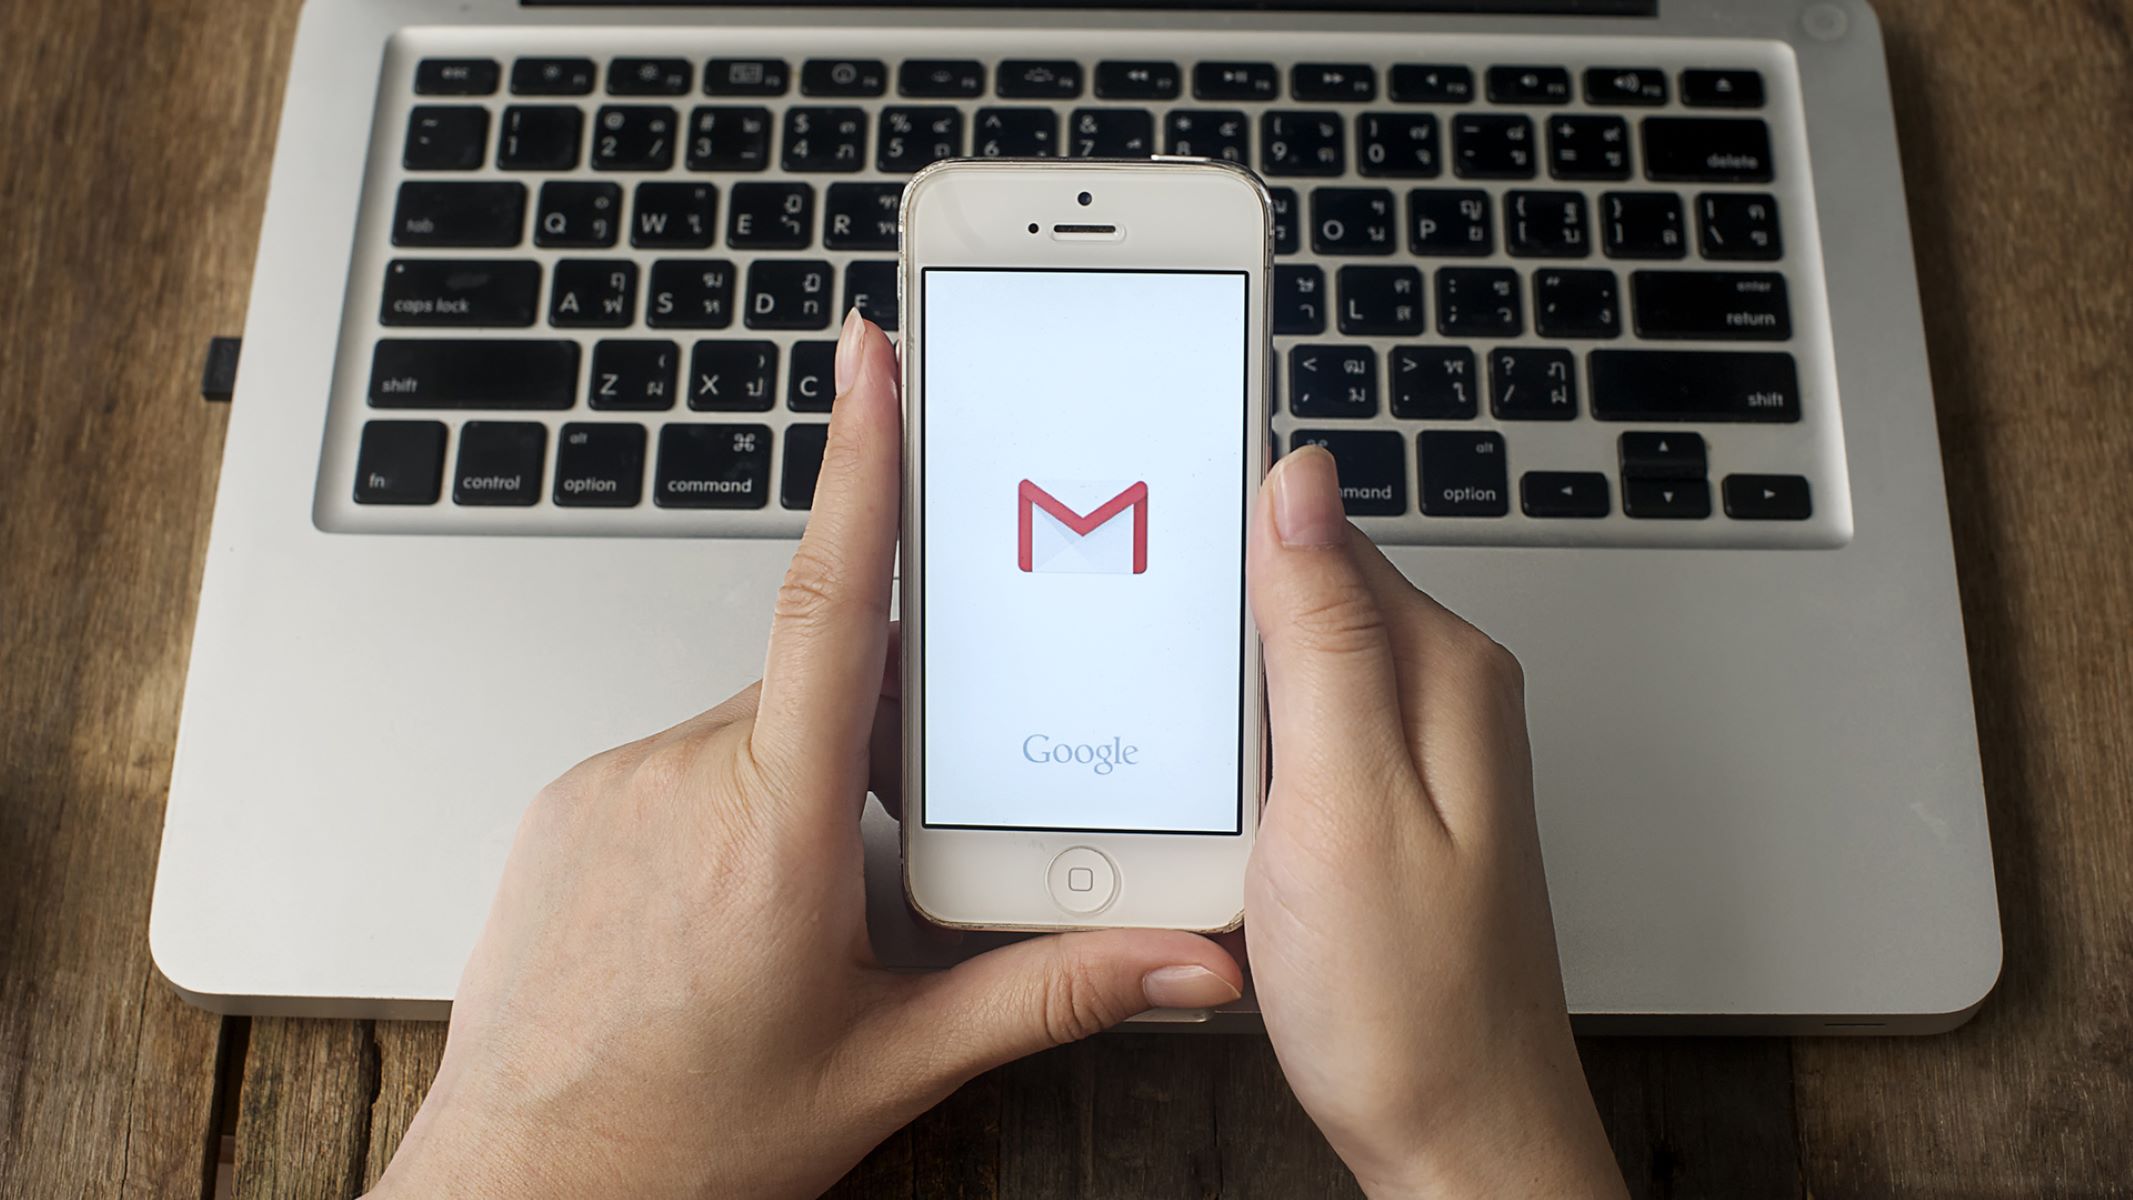 How To Change An Email Address In Gmail